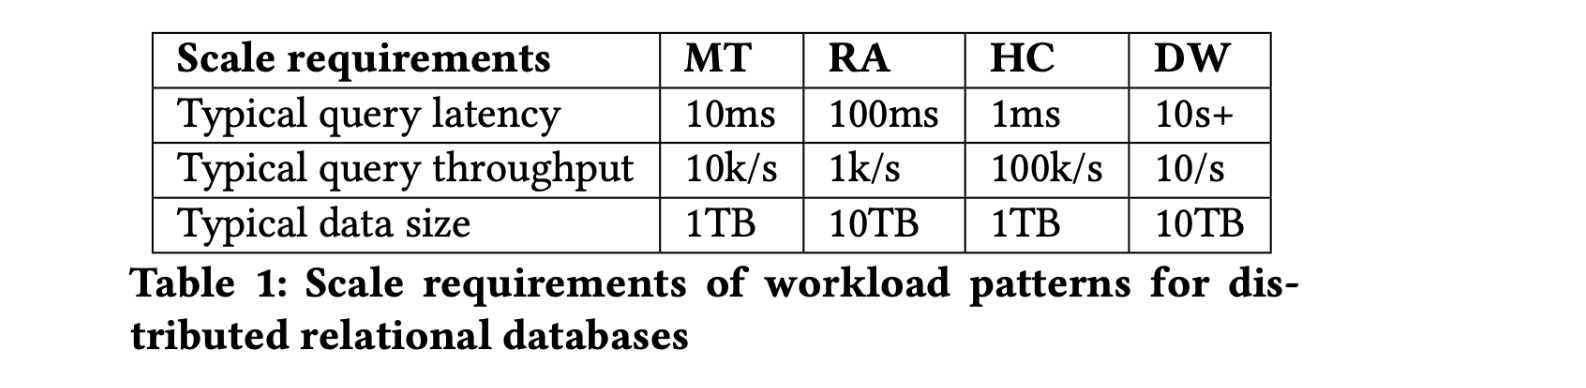 Four Workload Pattern